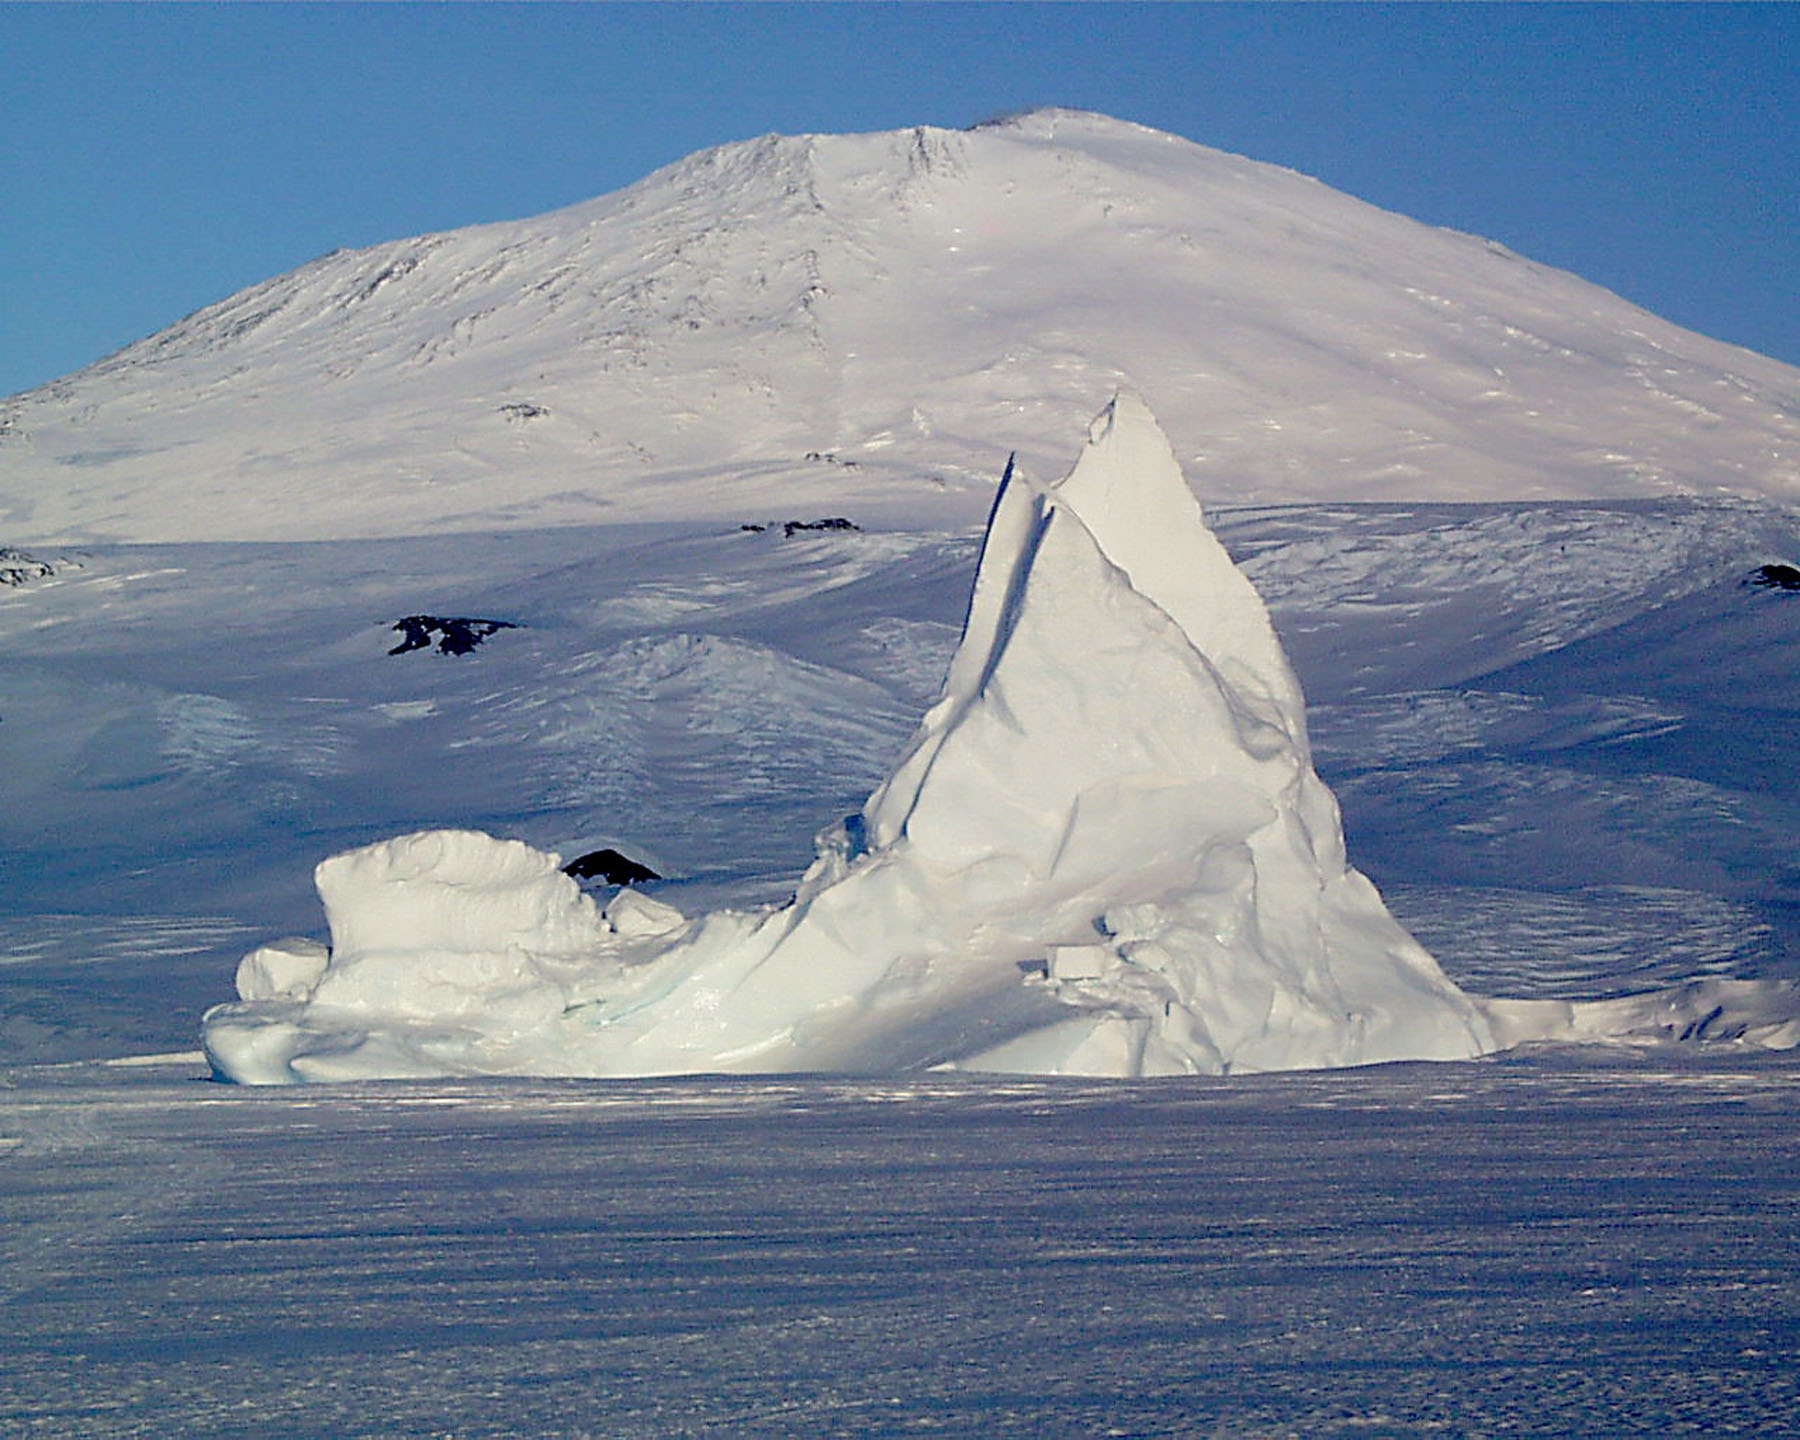 A snow covered mountain in the background and snow and ice in the foreground.